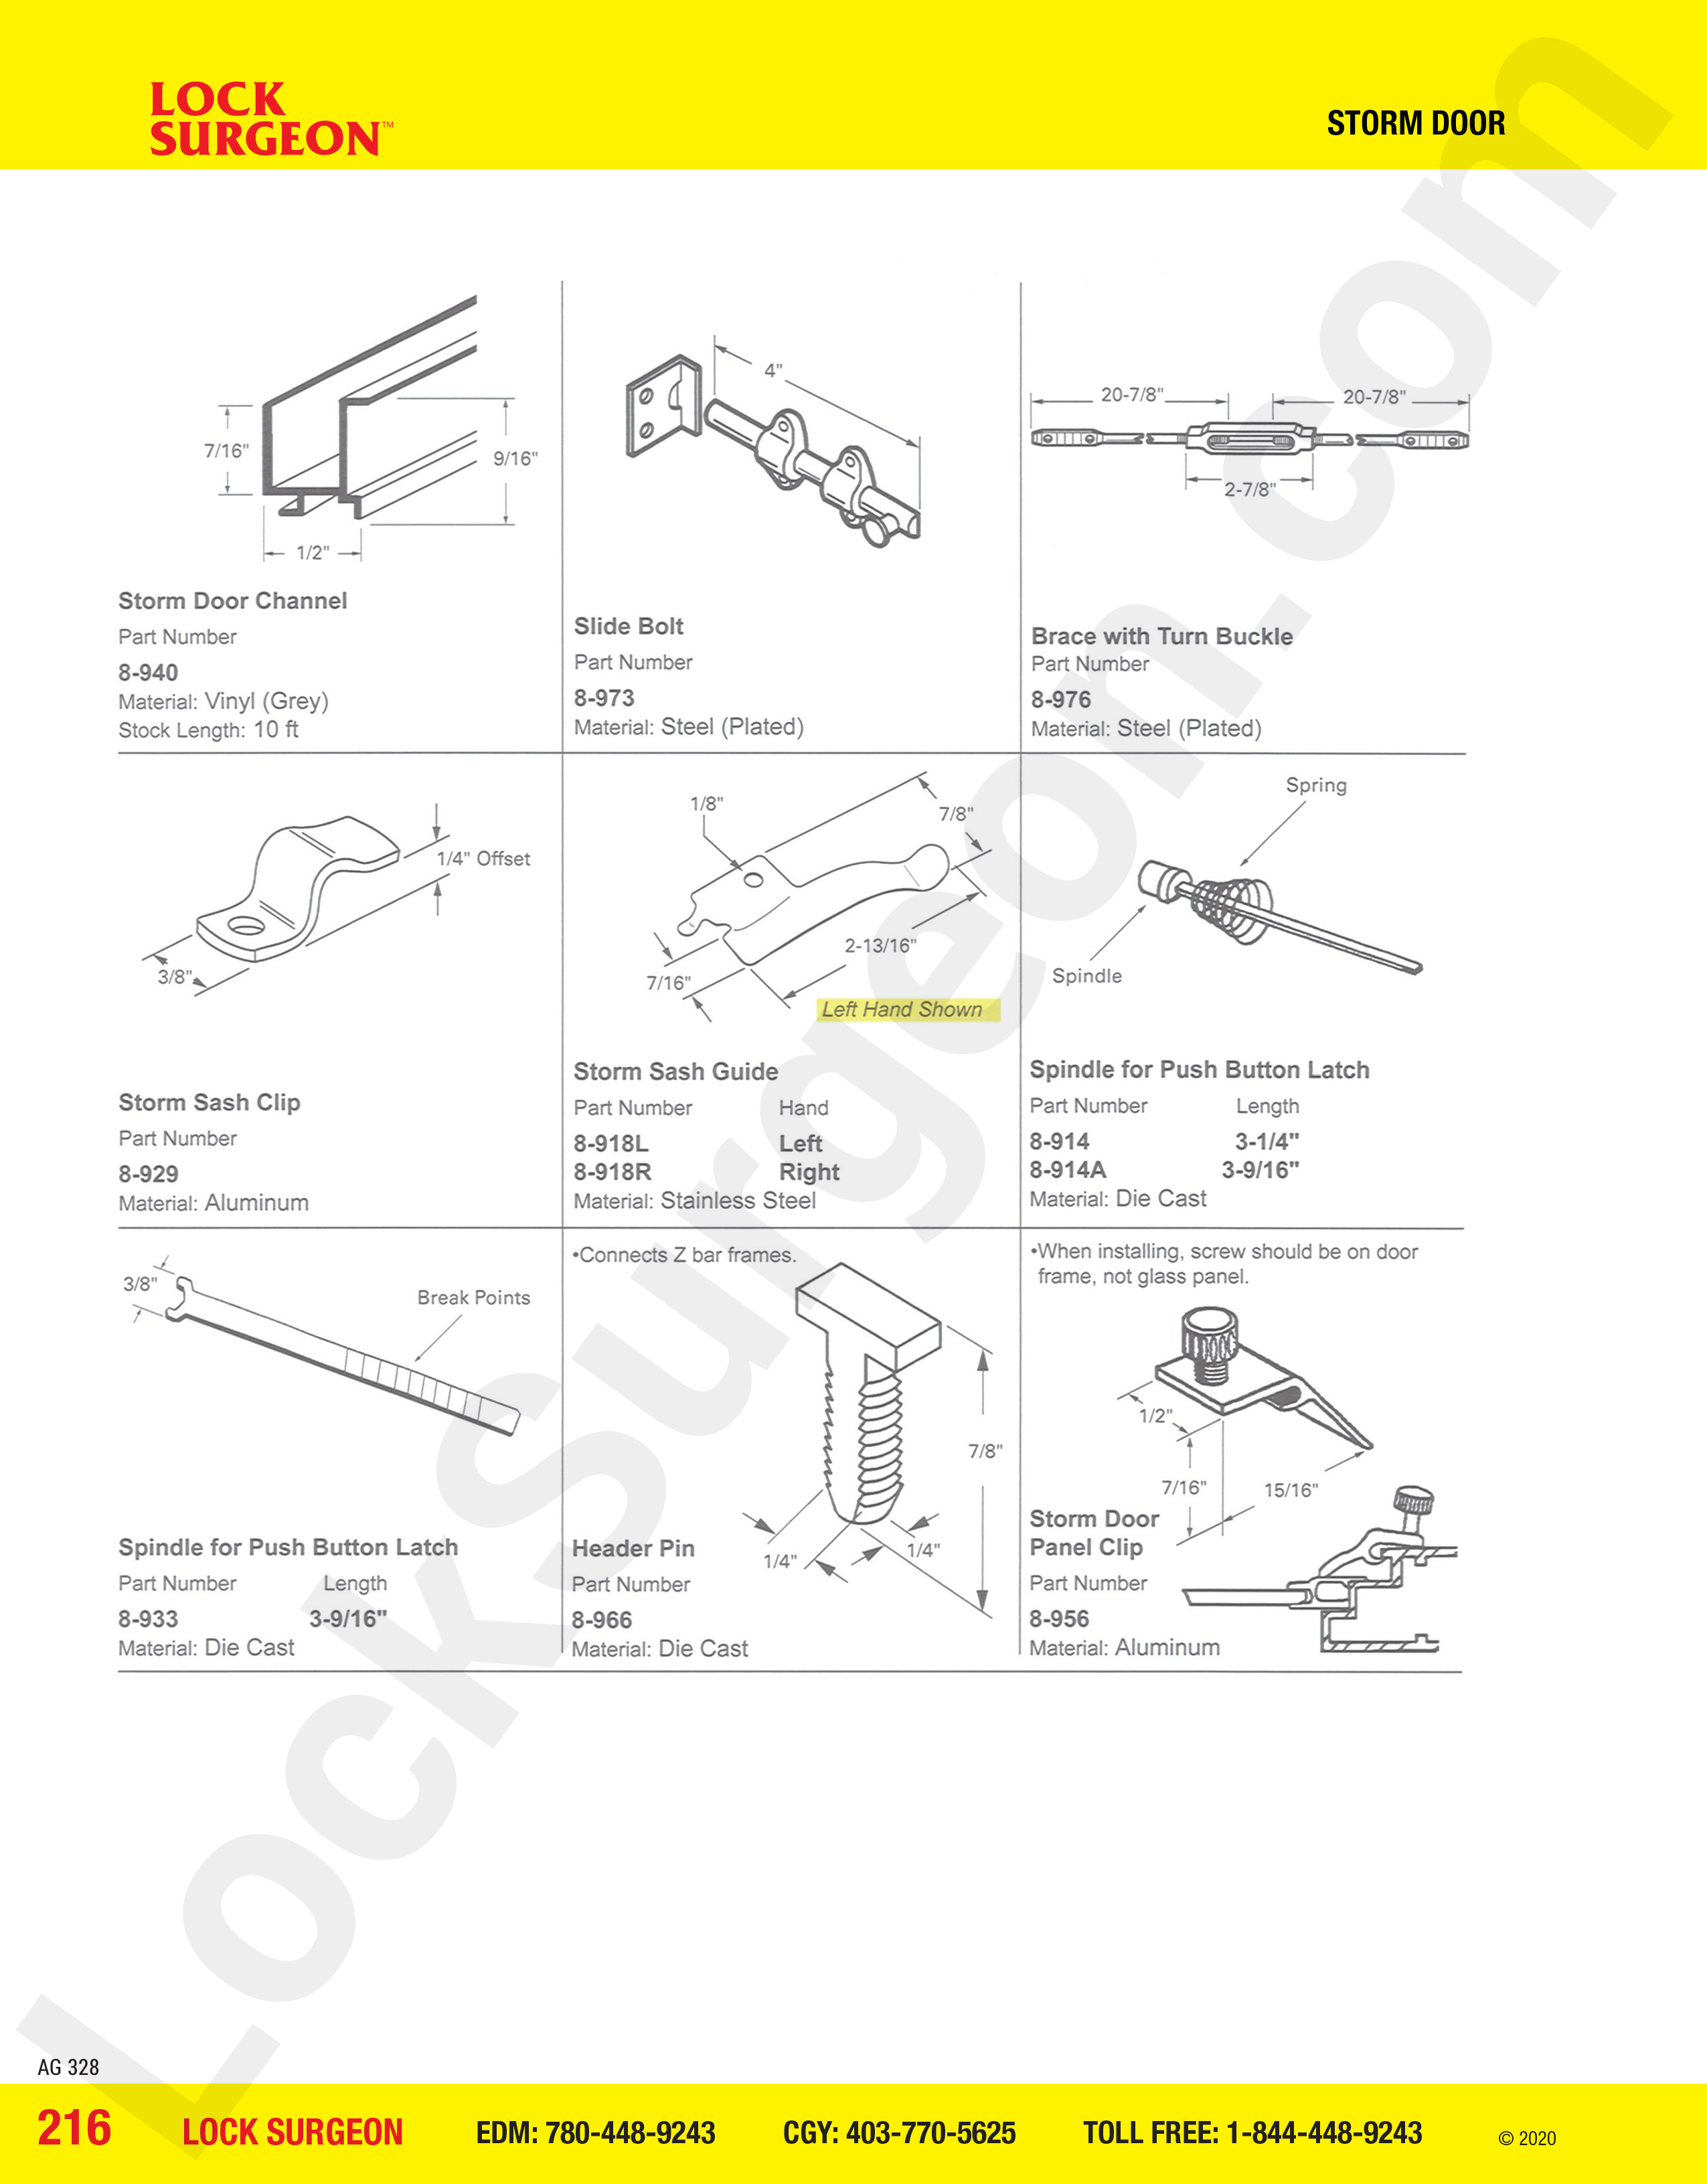 Storm Door extra parts channels slide bolts turn buckles sash clips spindles & panel clips.